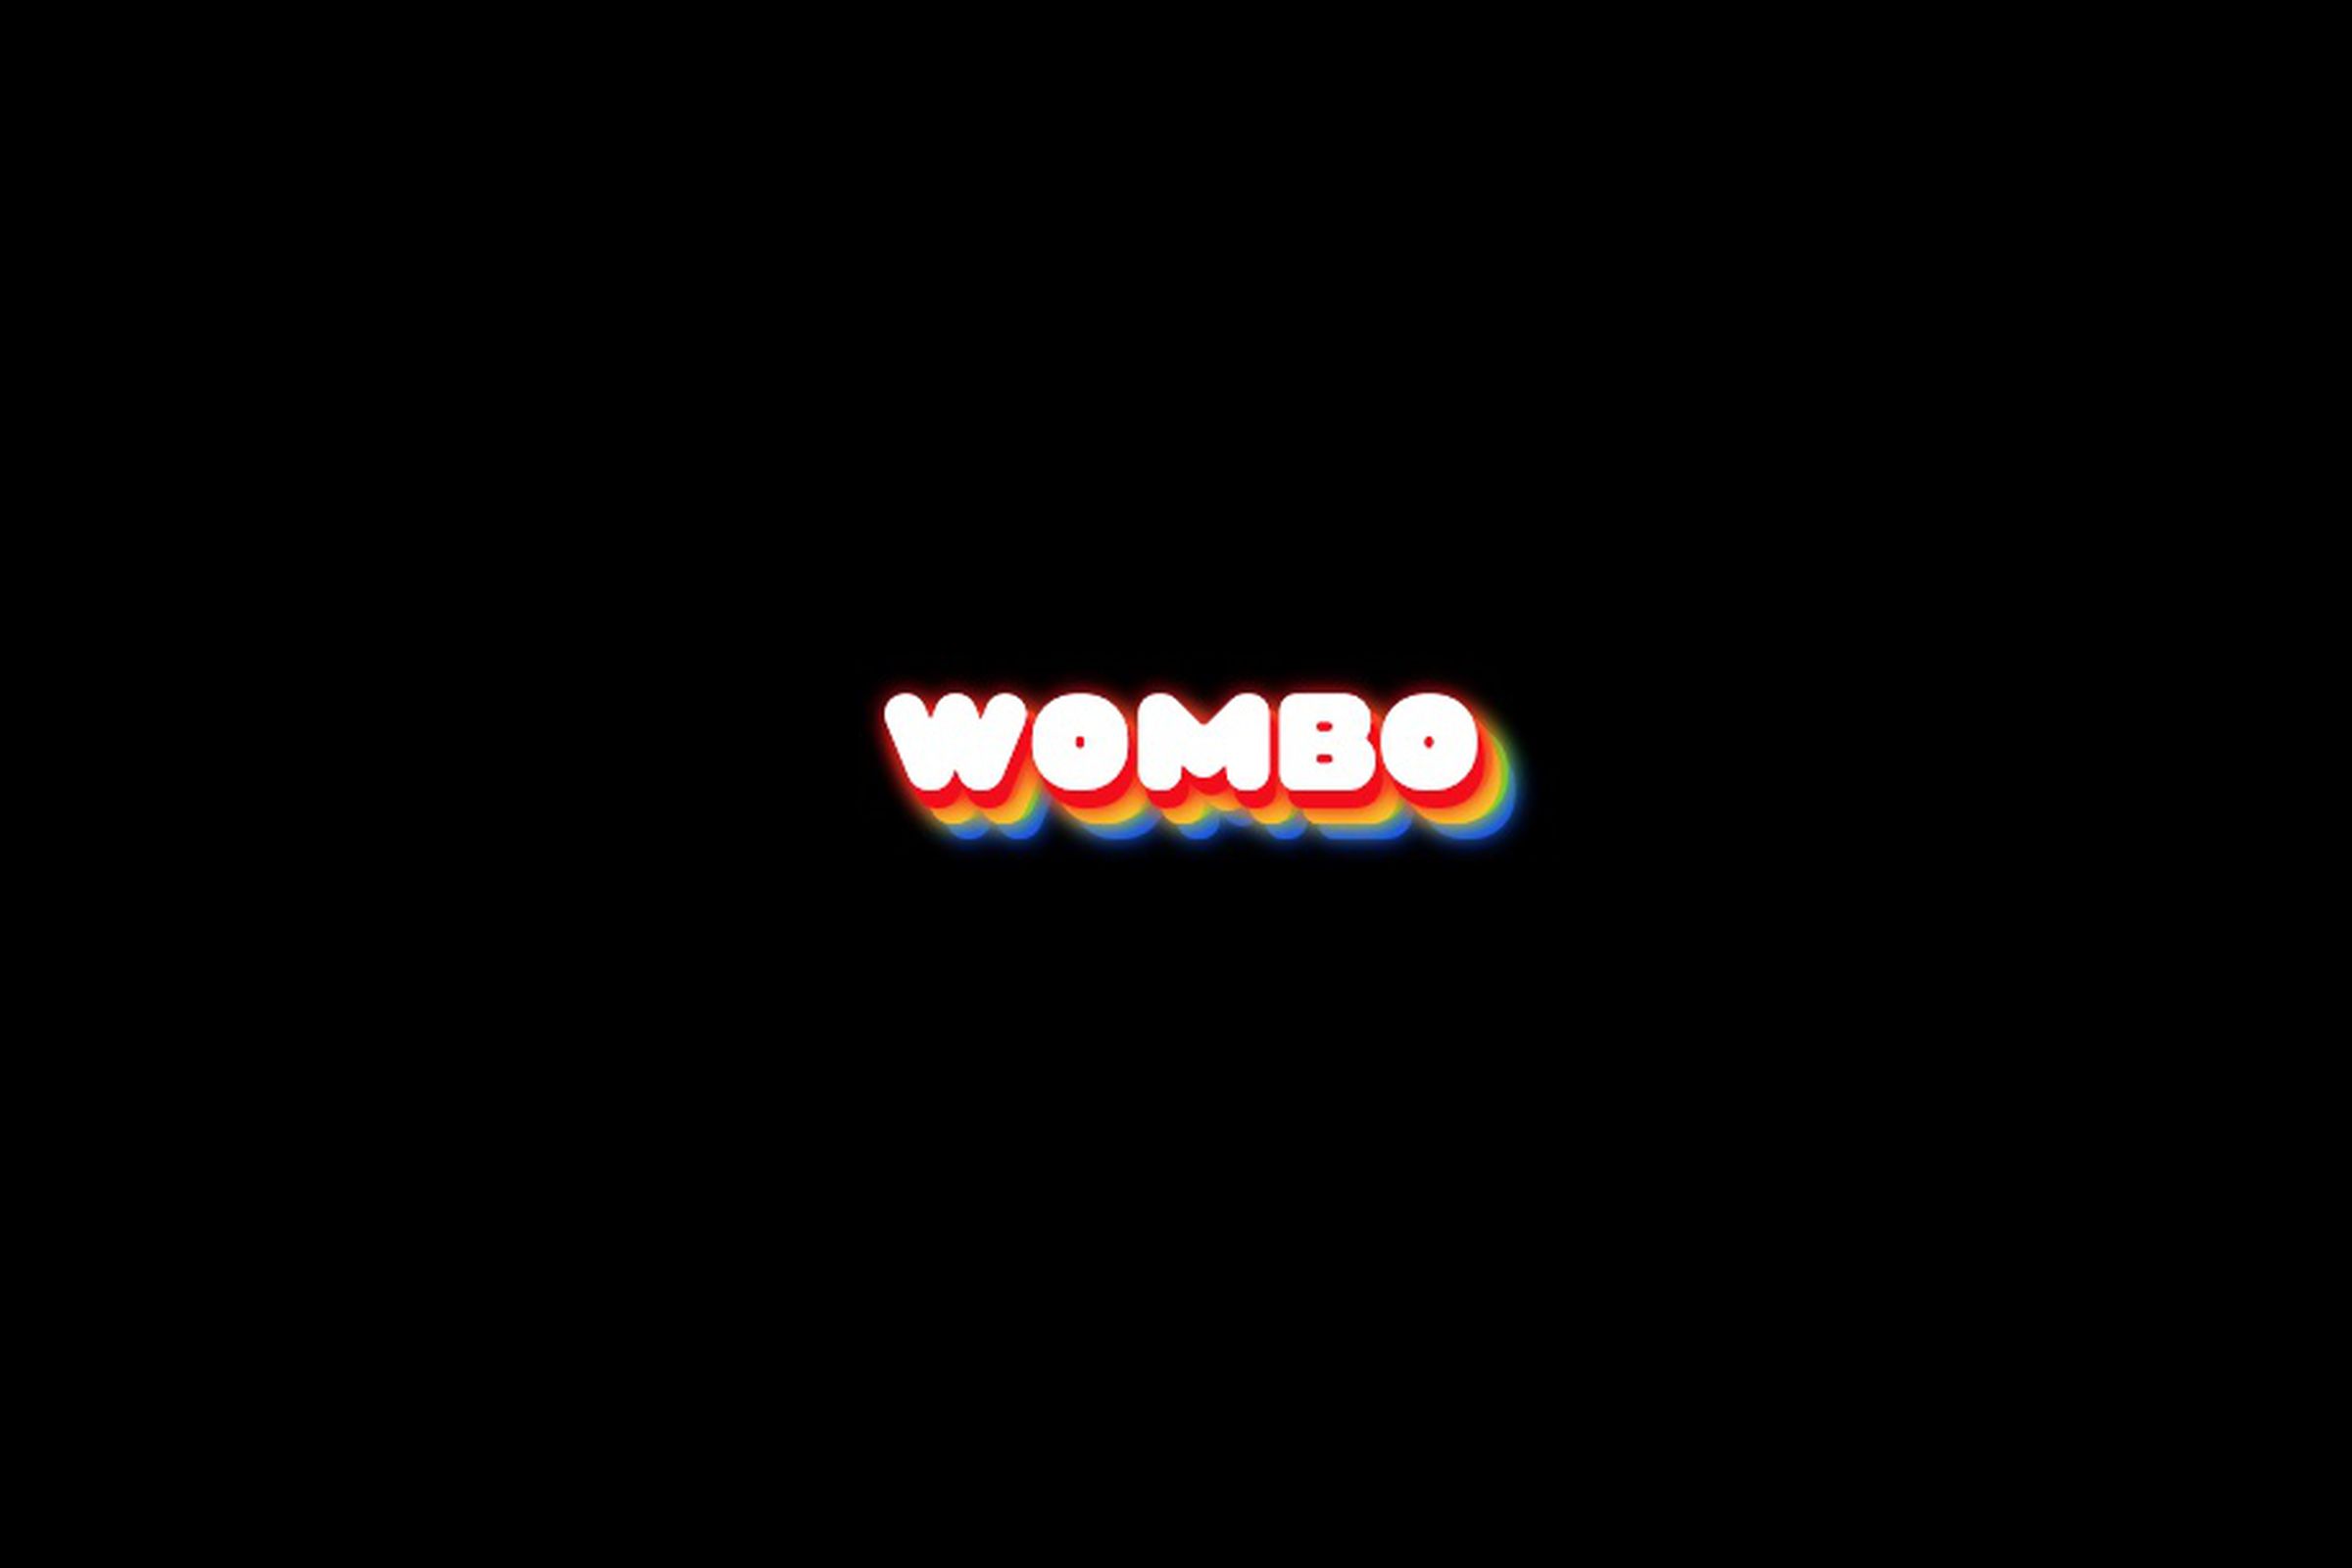 It’s Wombo time. 